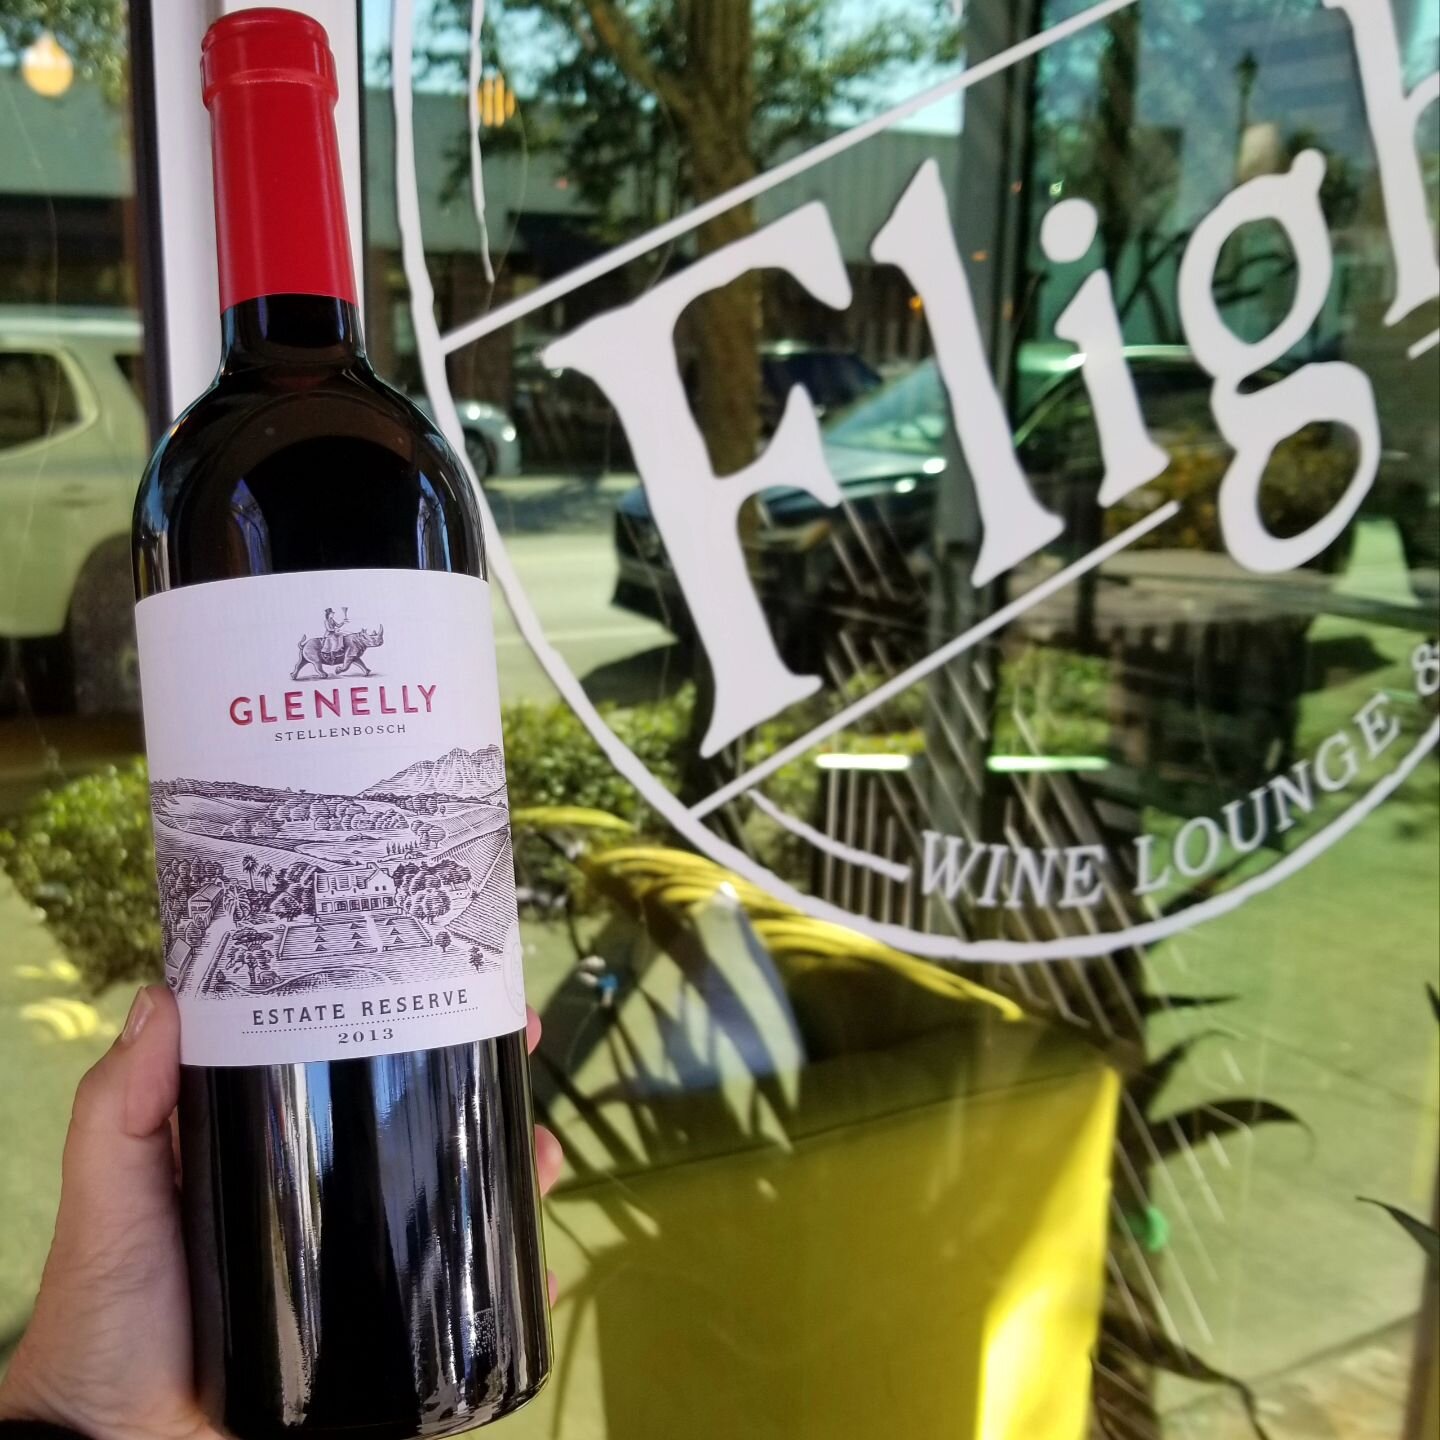 You made it to another Friday! That deserves some wine and some laughs. Pouring this South African red by the glass while supplies last.